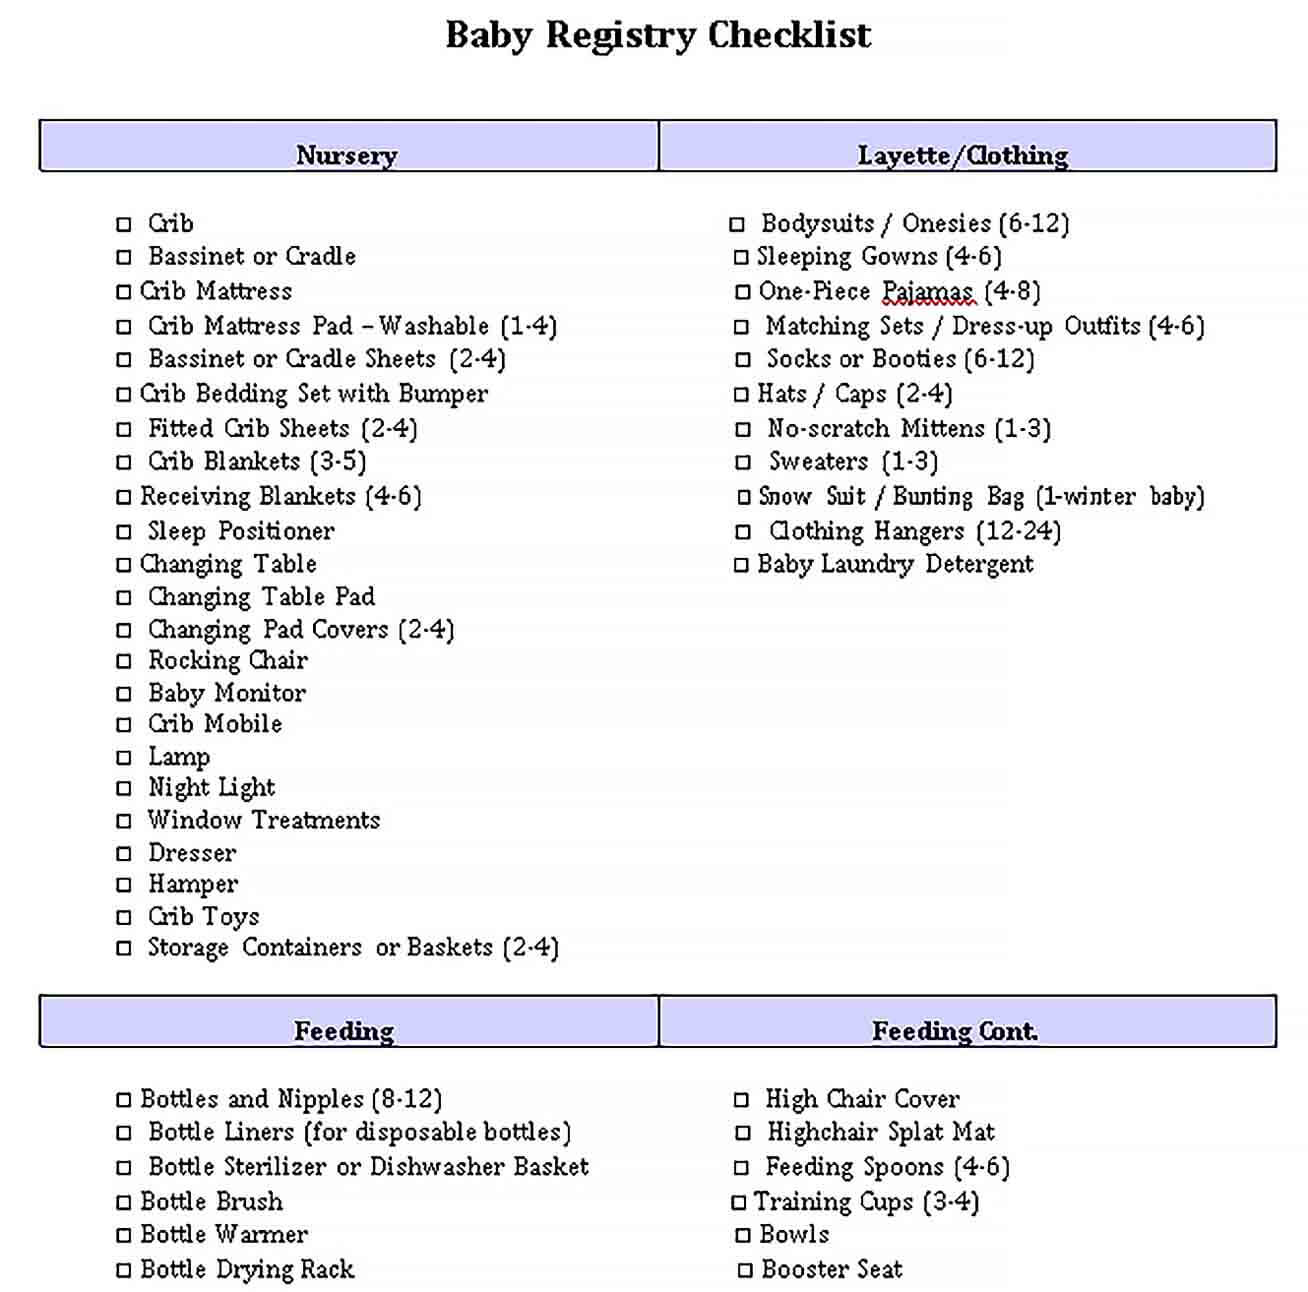 Sample Complete Registry Checklist for Baby